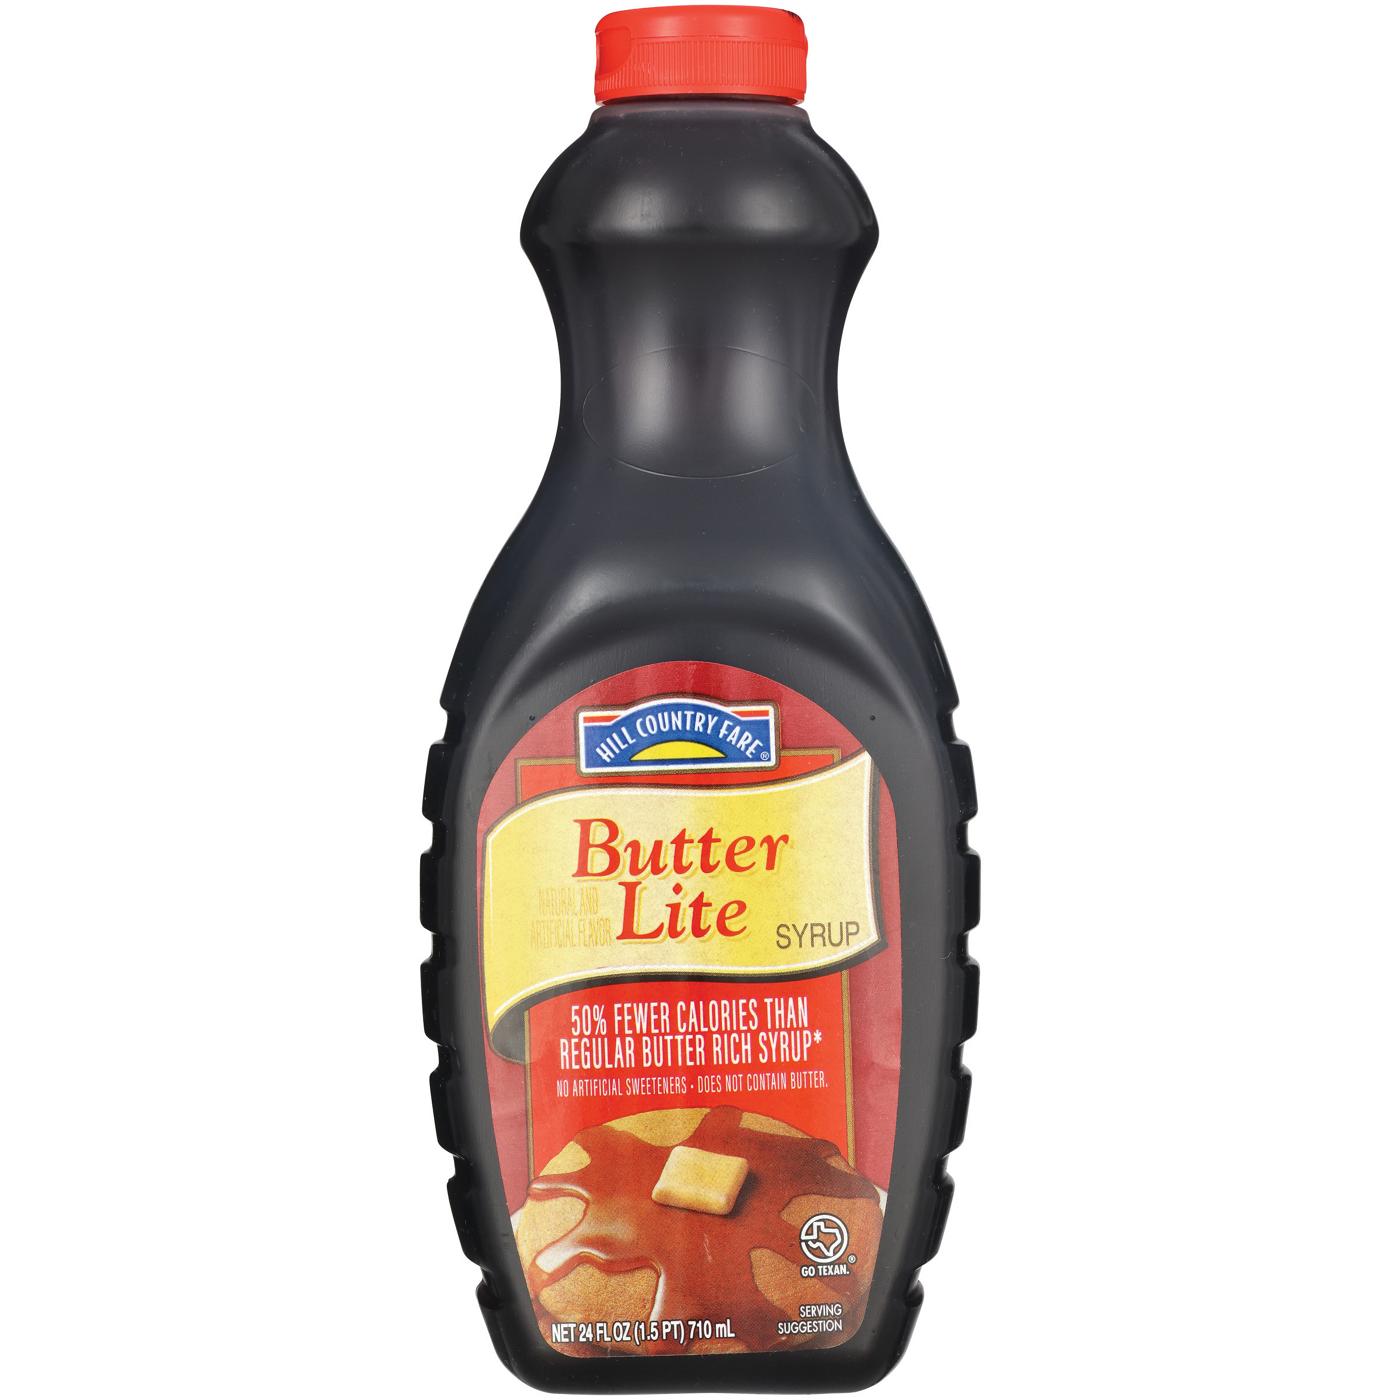 Hill Country Fare Butter Lite Syrup; image 1 of 2